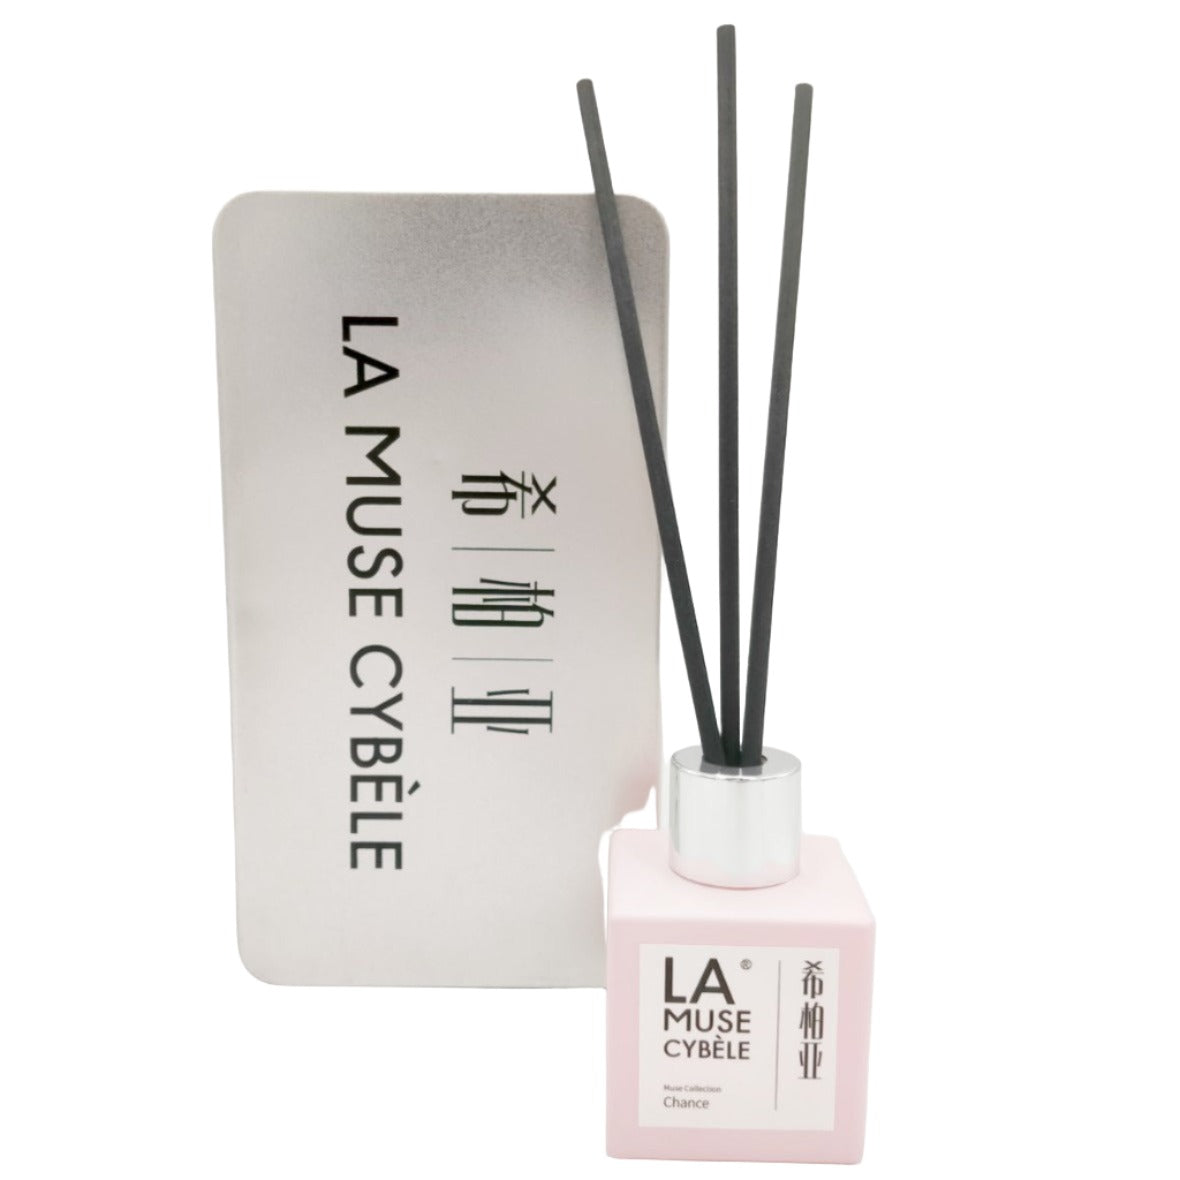 LA MUSE AROME REED DIFFUSER (DOUBLE BOTTLE) CHANCE